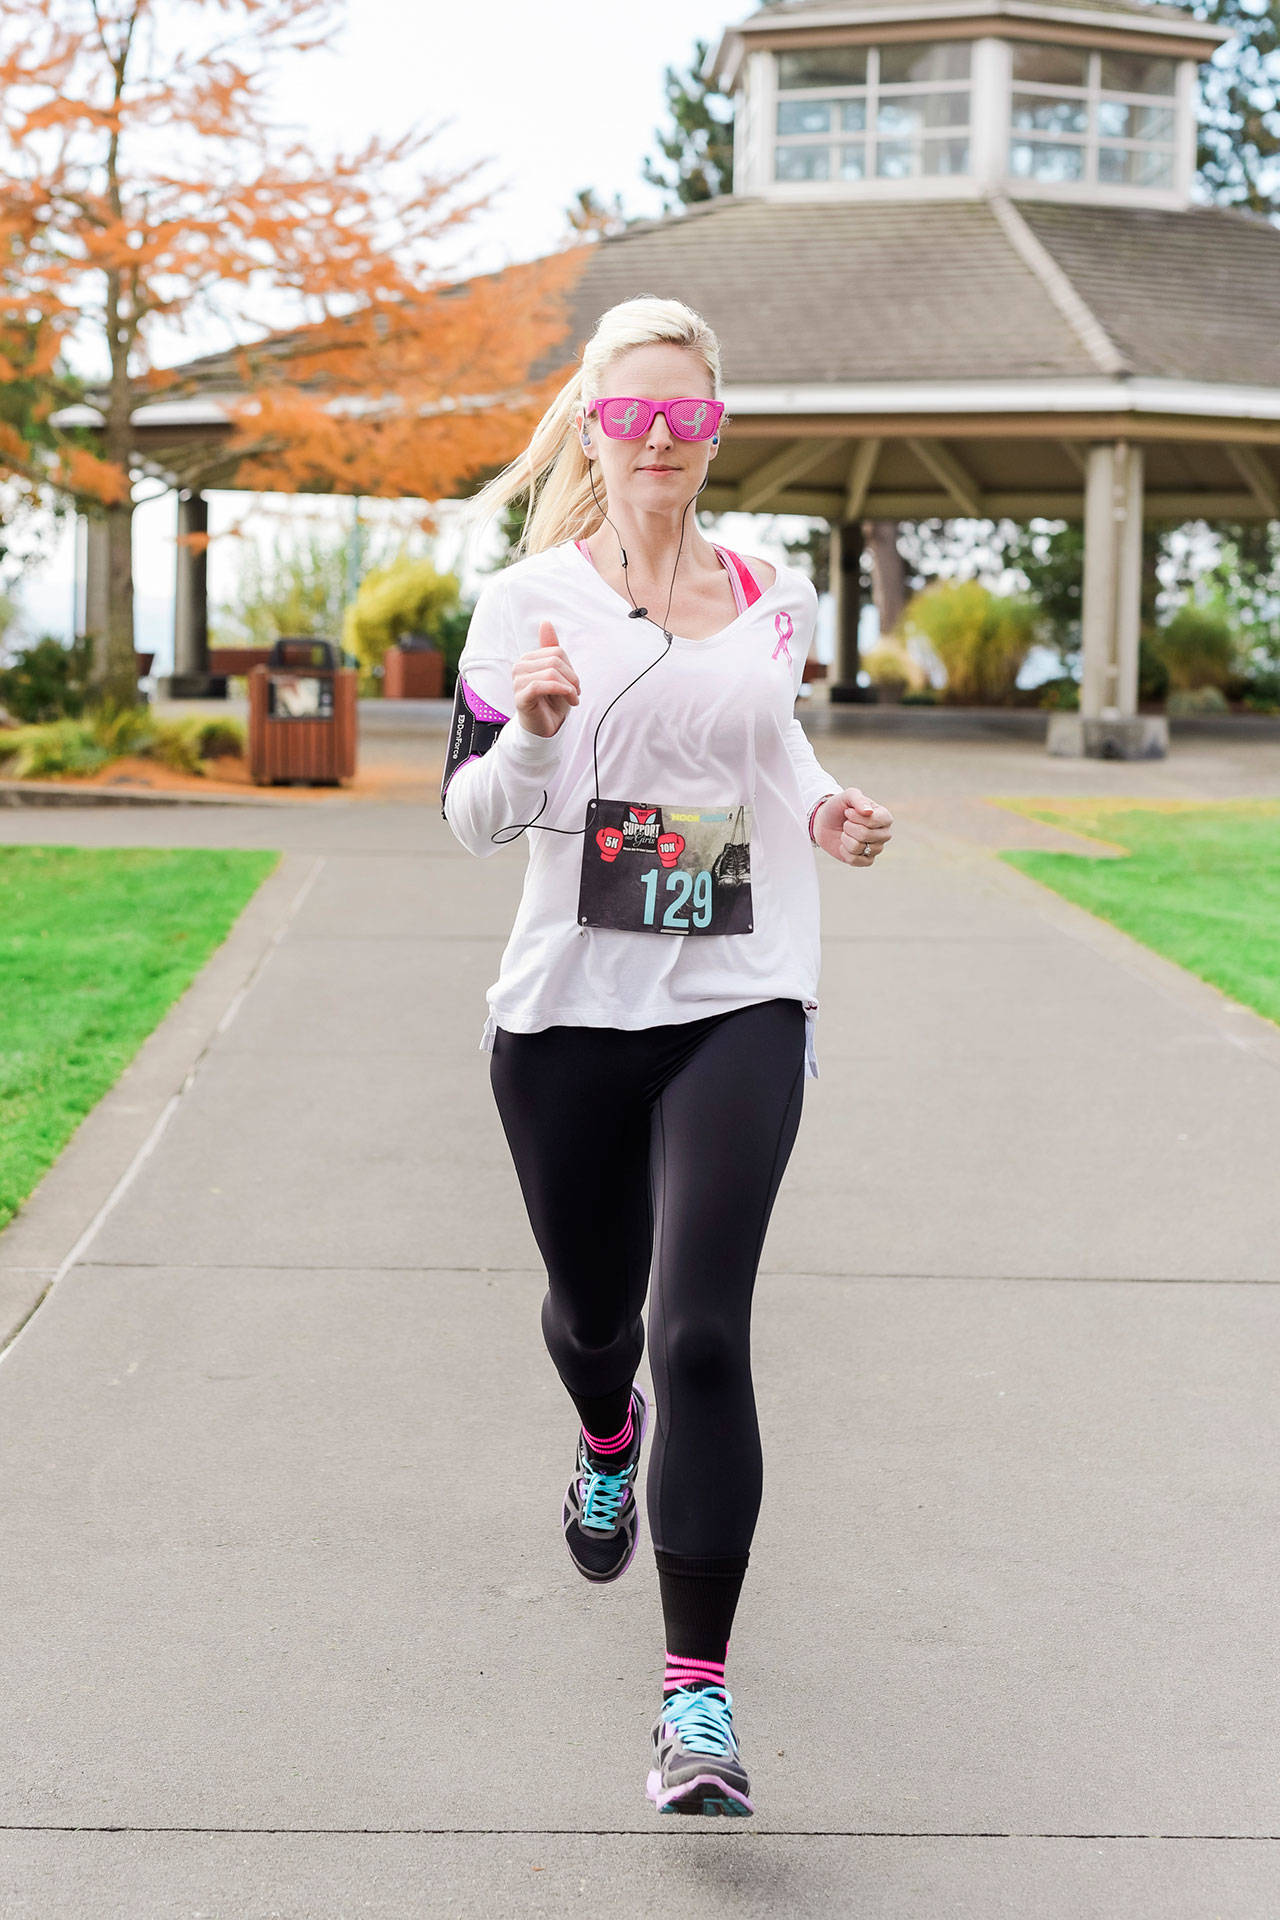 Janae Smith prepares for a 10K run to raise money for breast cancer research. Courtesy of Jami West Photography